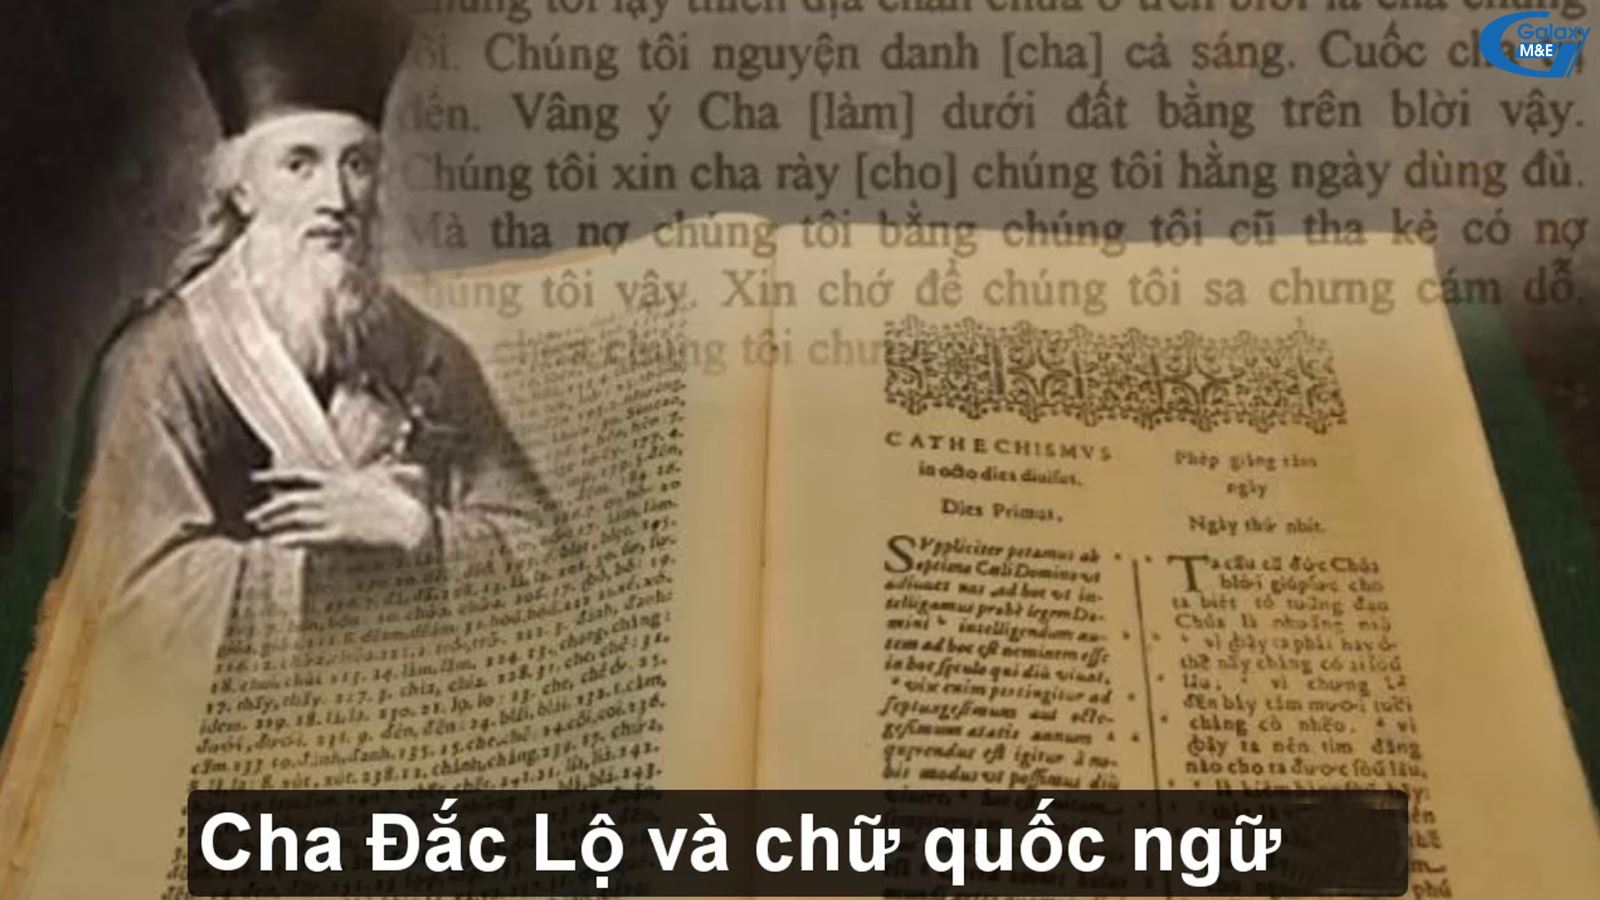 Father Dac Lo - Father Alexandre de Rhodes, along with four pastors and a Japanese believer, arrived in Hoi An in the 16th century to bring the catholic religion into Vietnam which created the national language today.